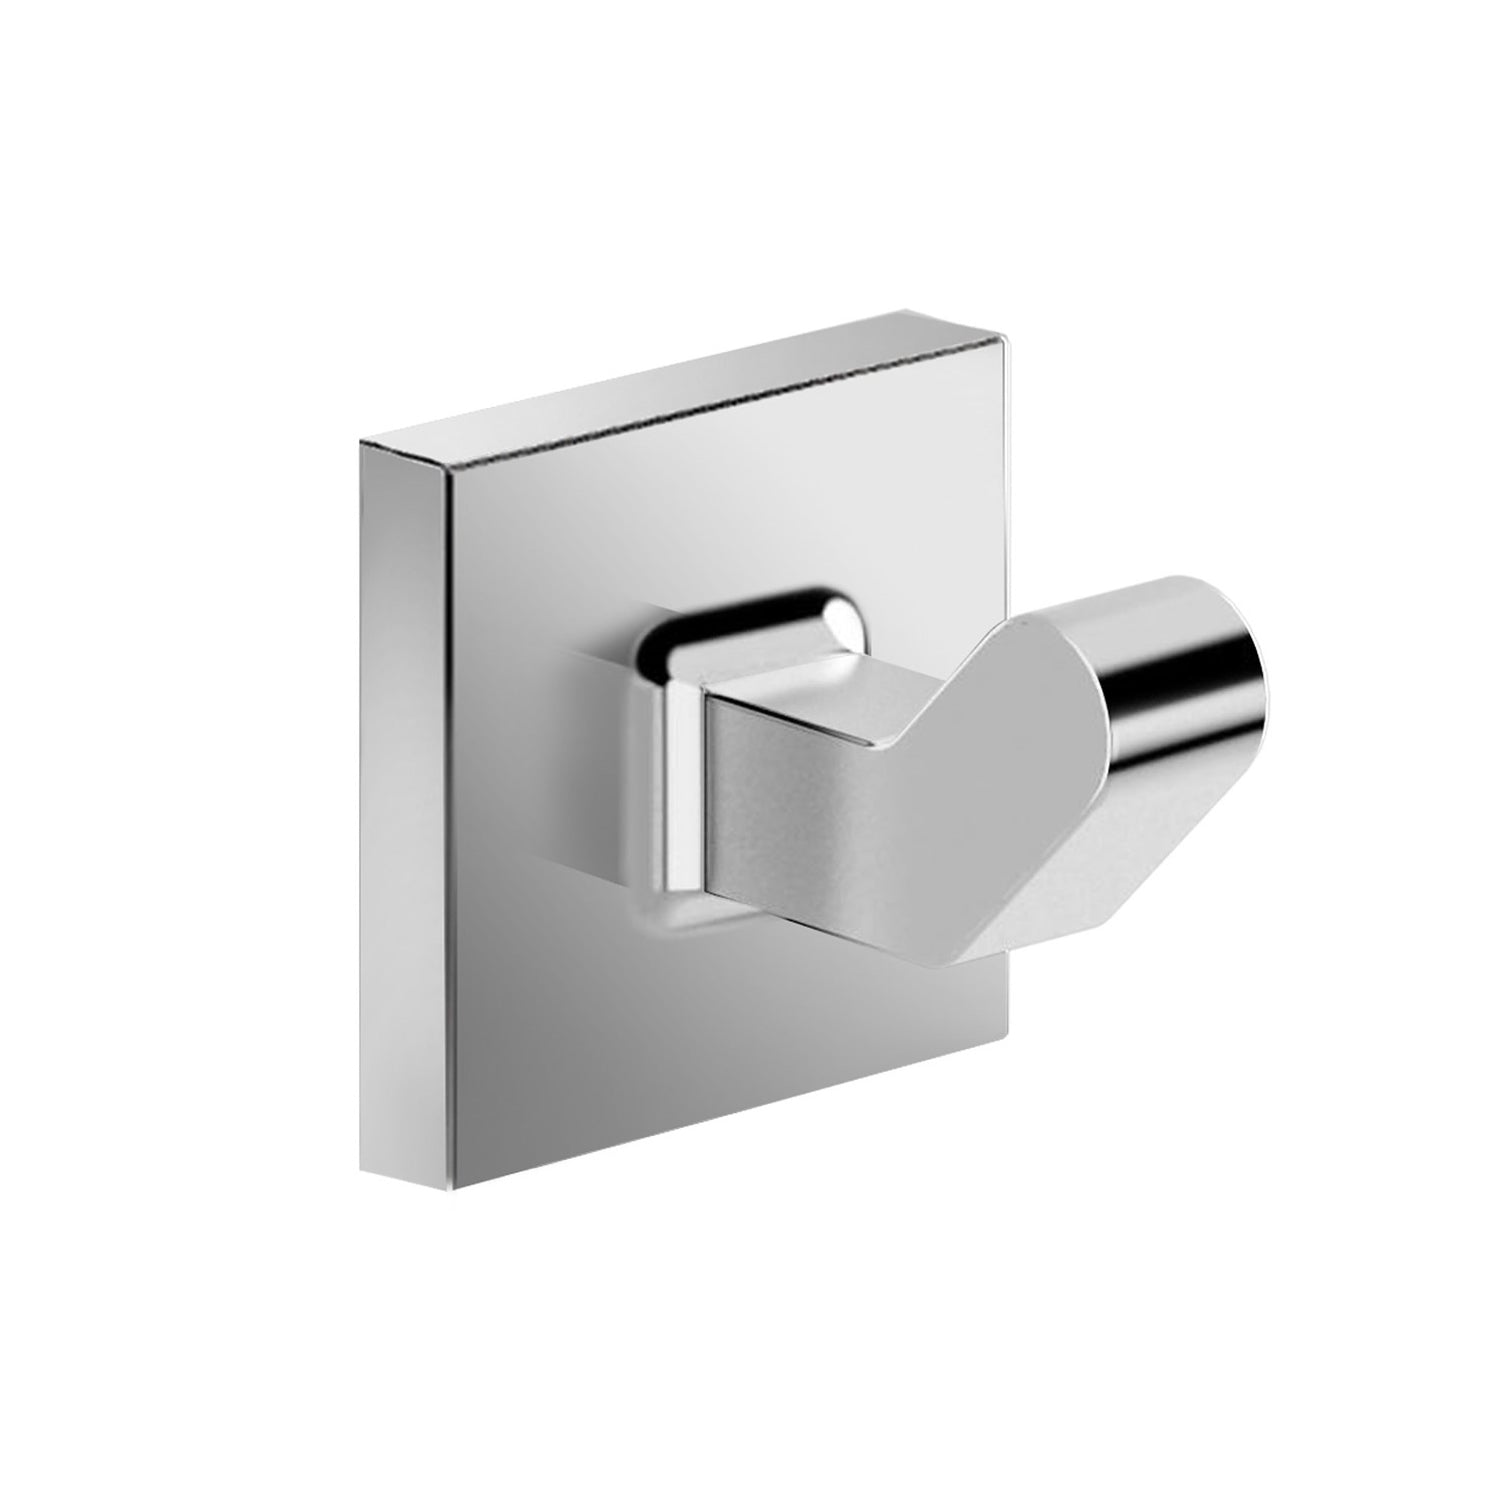 DAX Milano Towel Hook, Wall Mount Stainless Steel, 1-3/4 x 2 x 1-3/4 Inches (DAX-GDC160121)